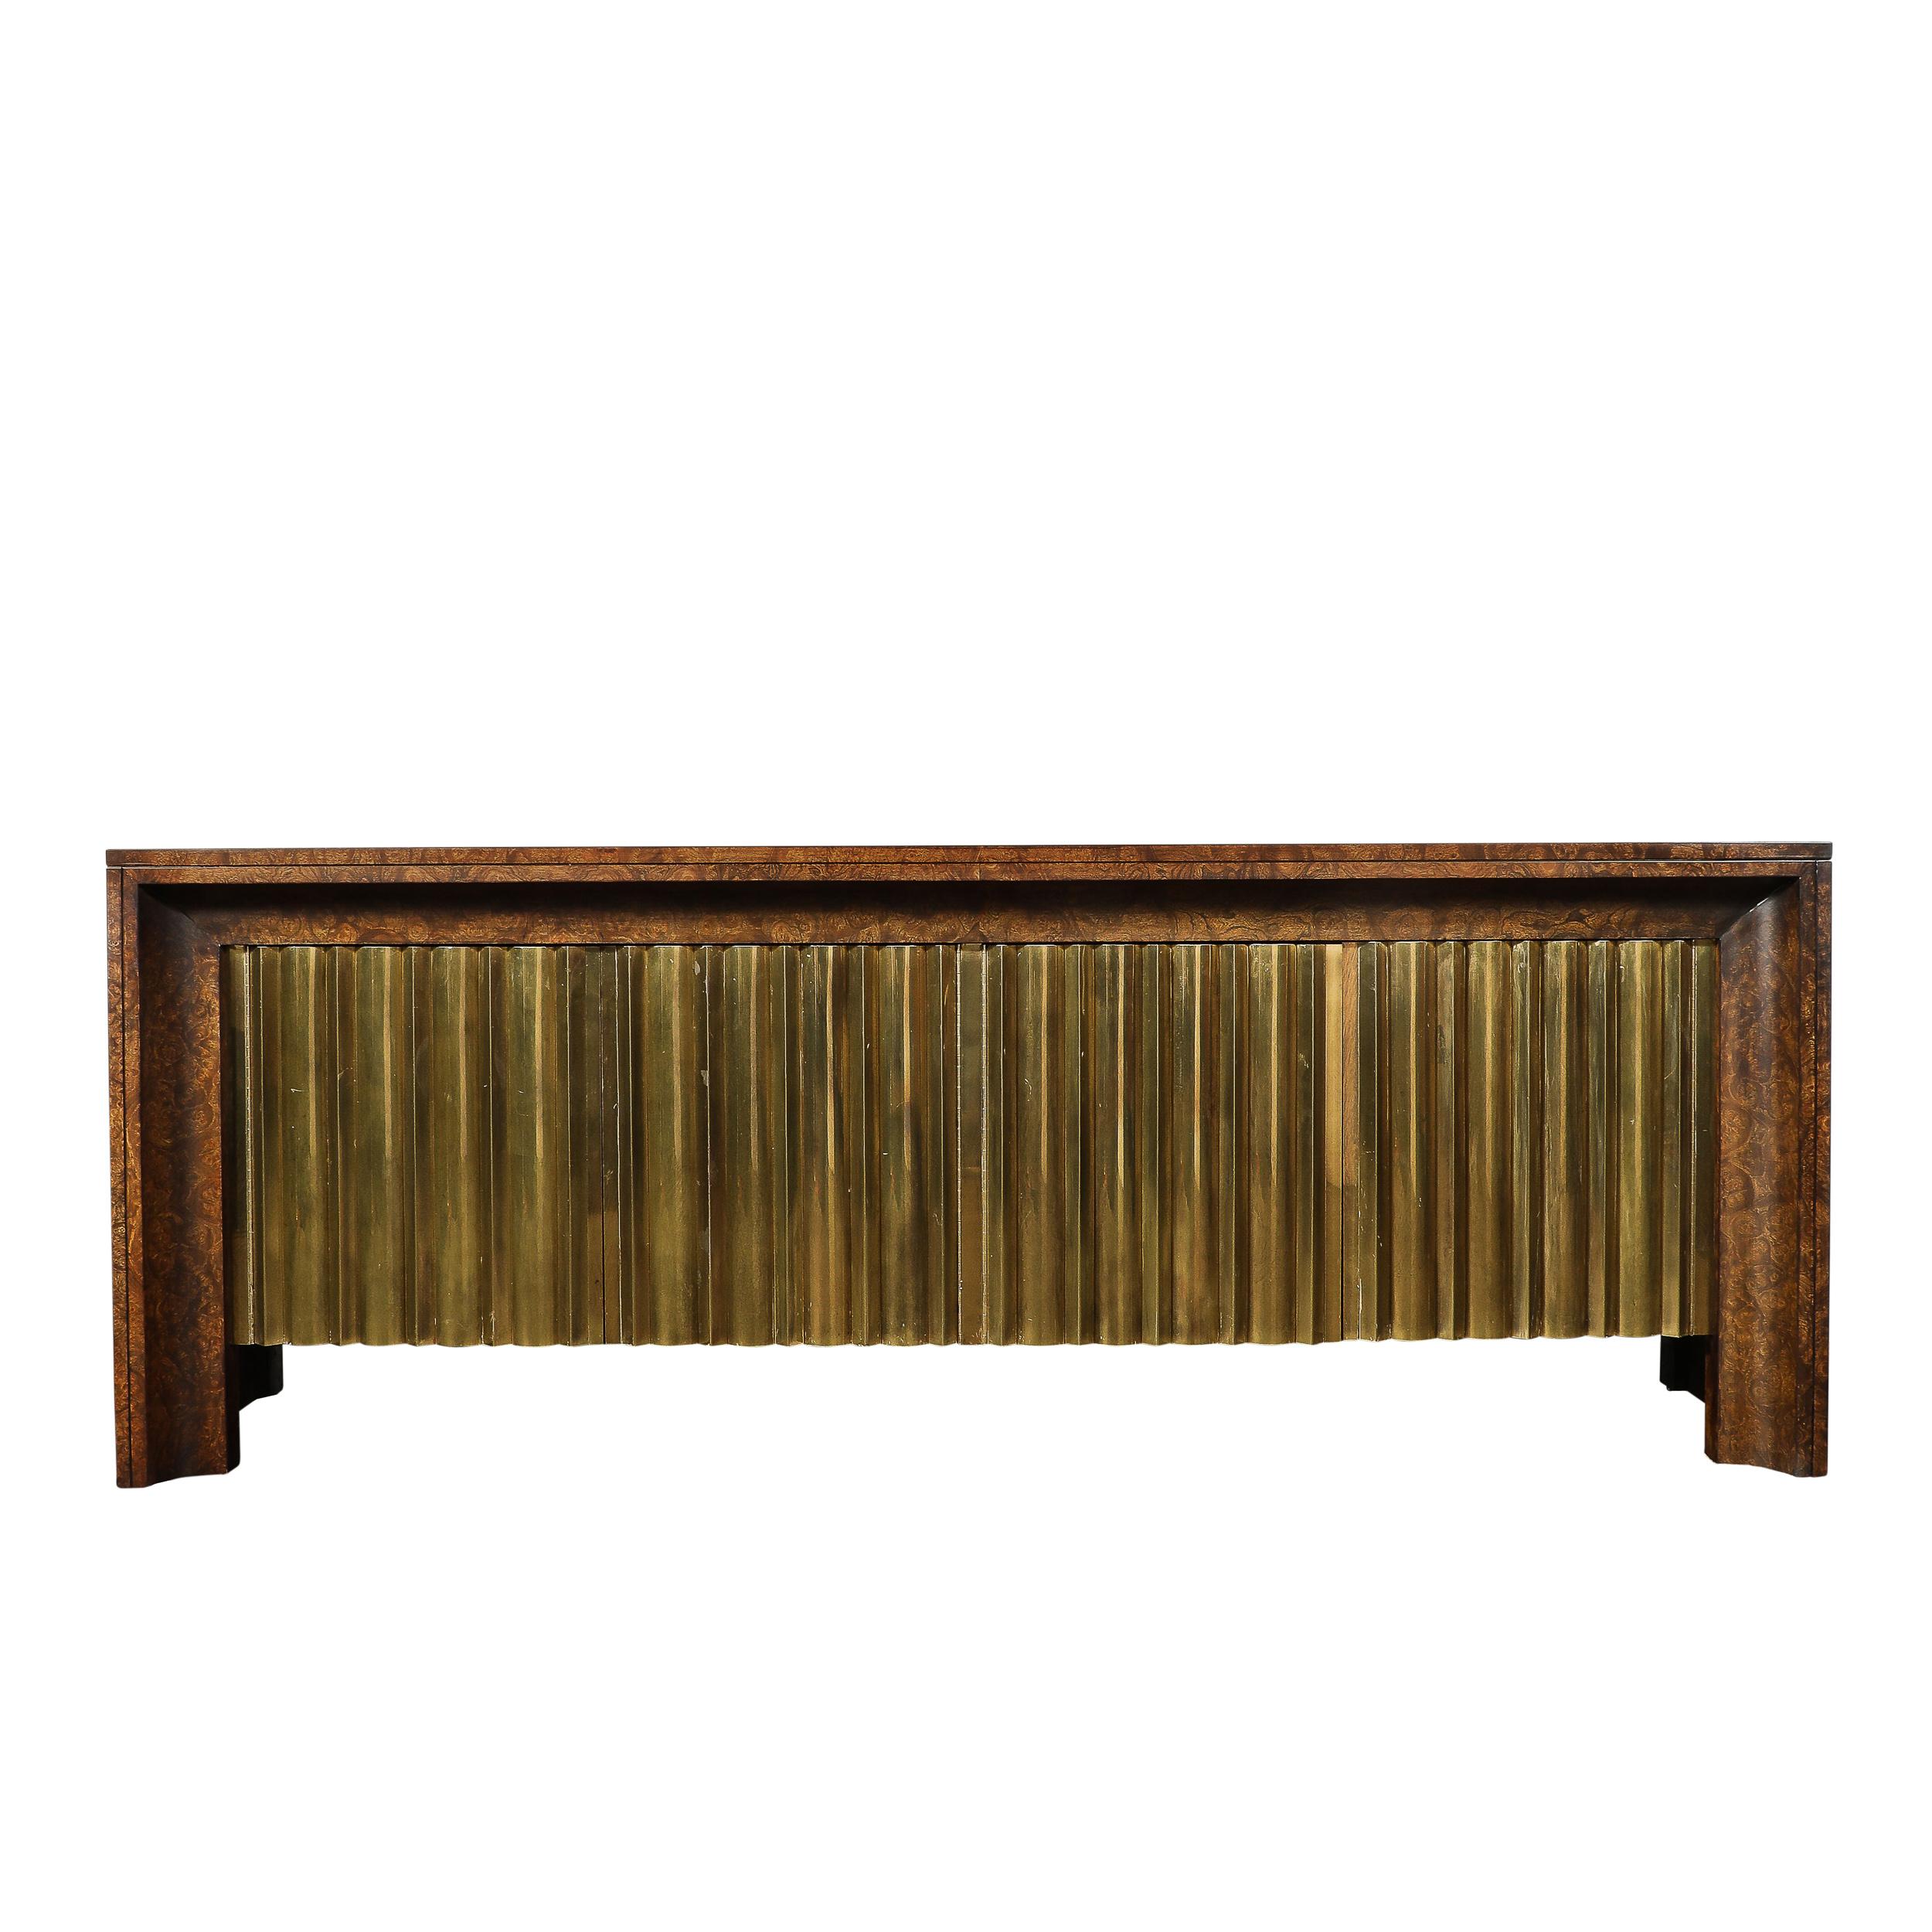 This highly unique and materially exquisite Mid-Century Modernist Shadowbox Sideboard in Book-Matched and Burled Carpathian Elm with Macassar Inlays and Antiqued Brass Drawers signed by Mastercraft originates from the United States, Circa 1970. A